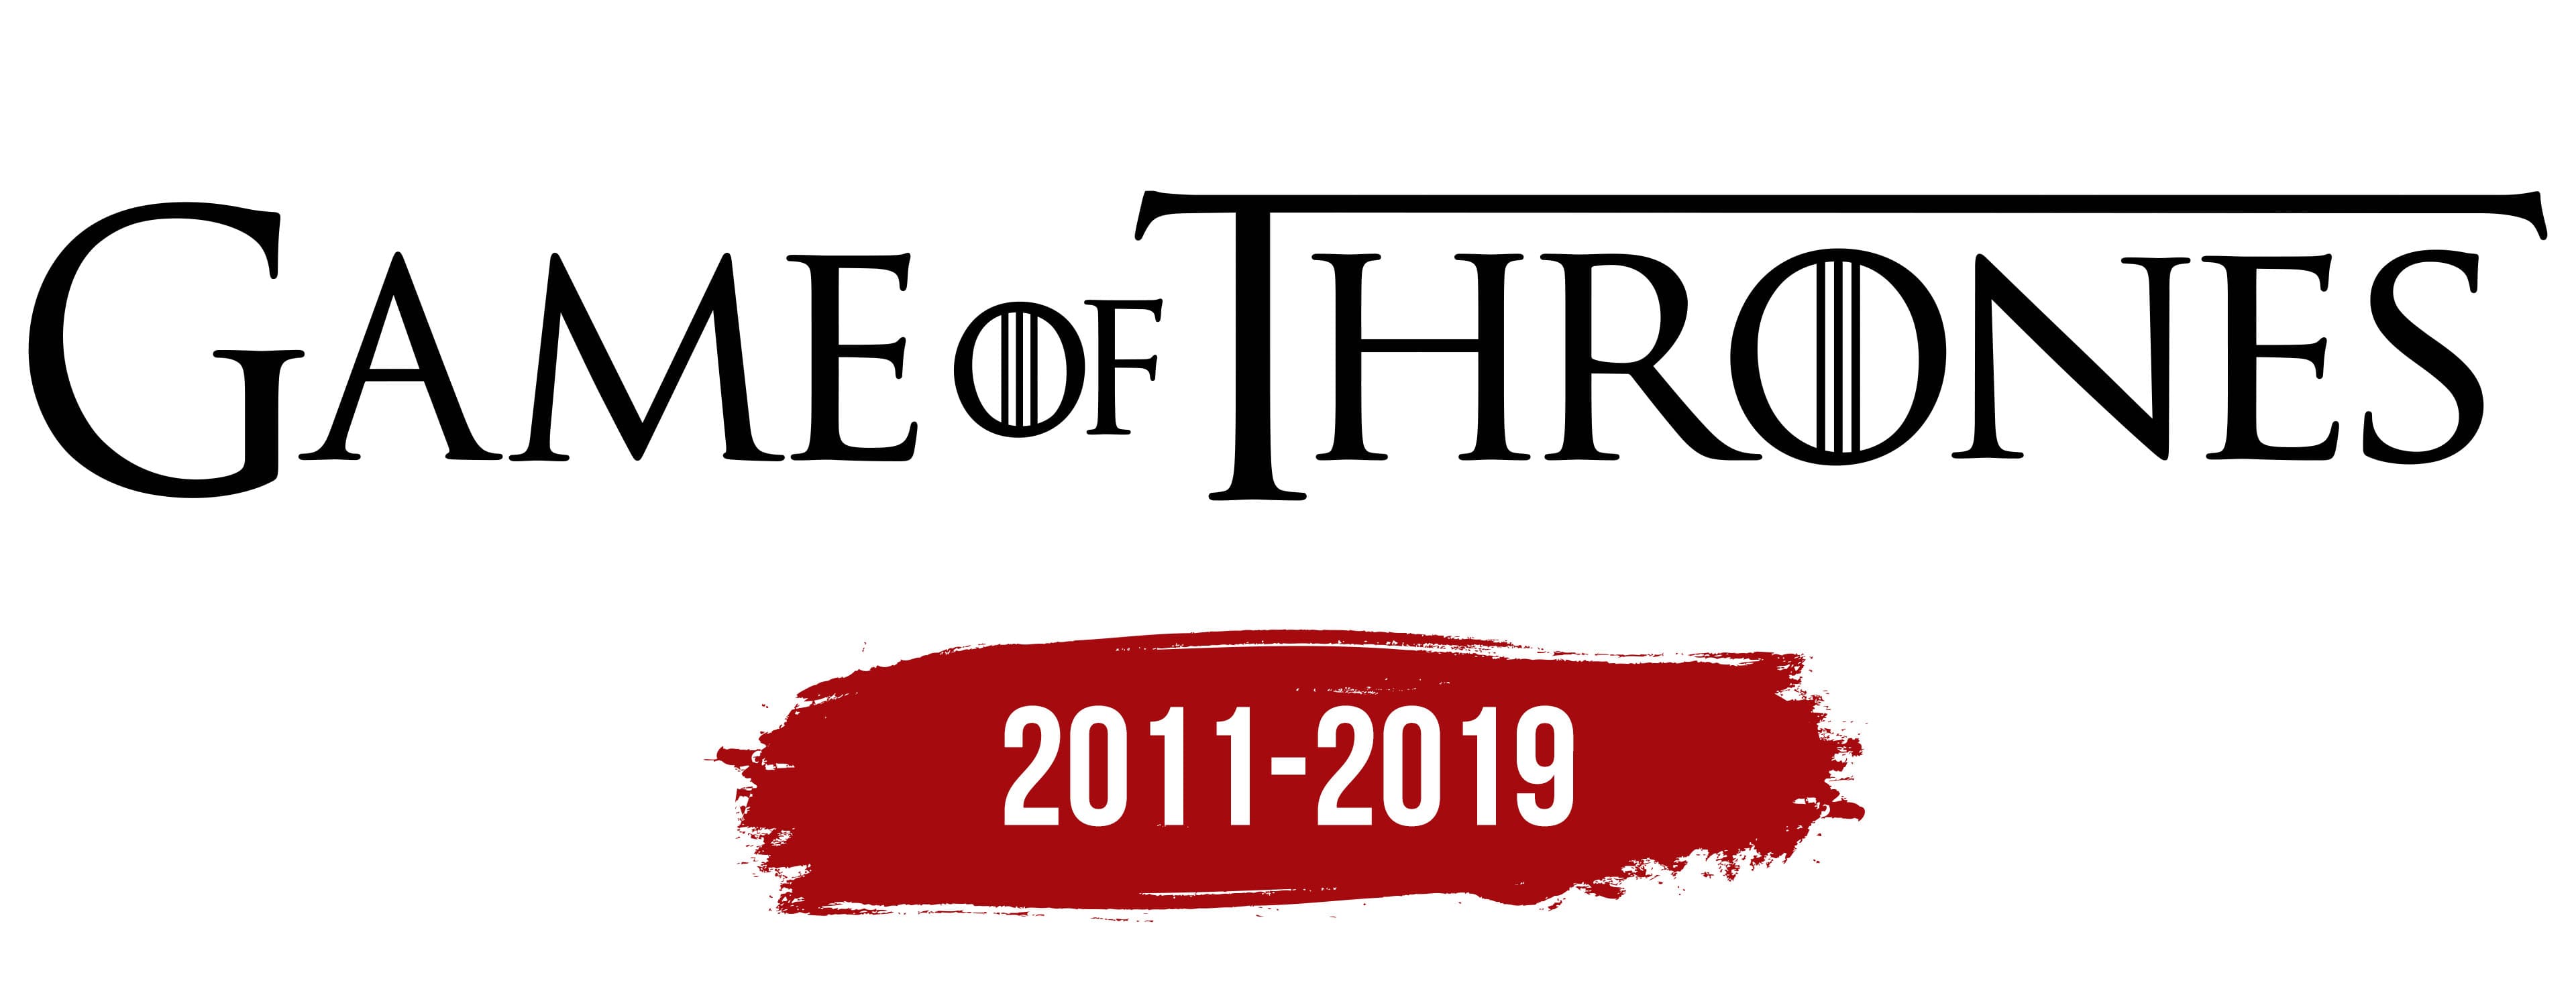 File:Game of Thrones 2011 logo.svg - Wikipedia